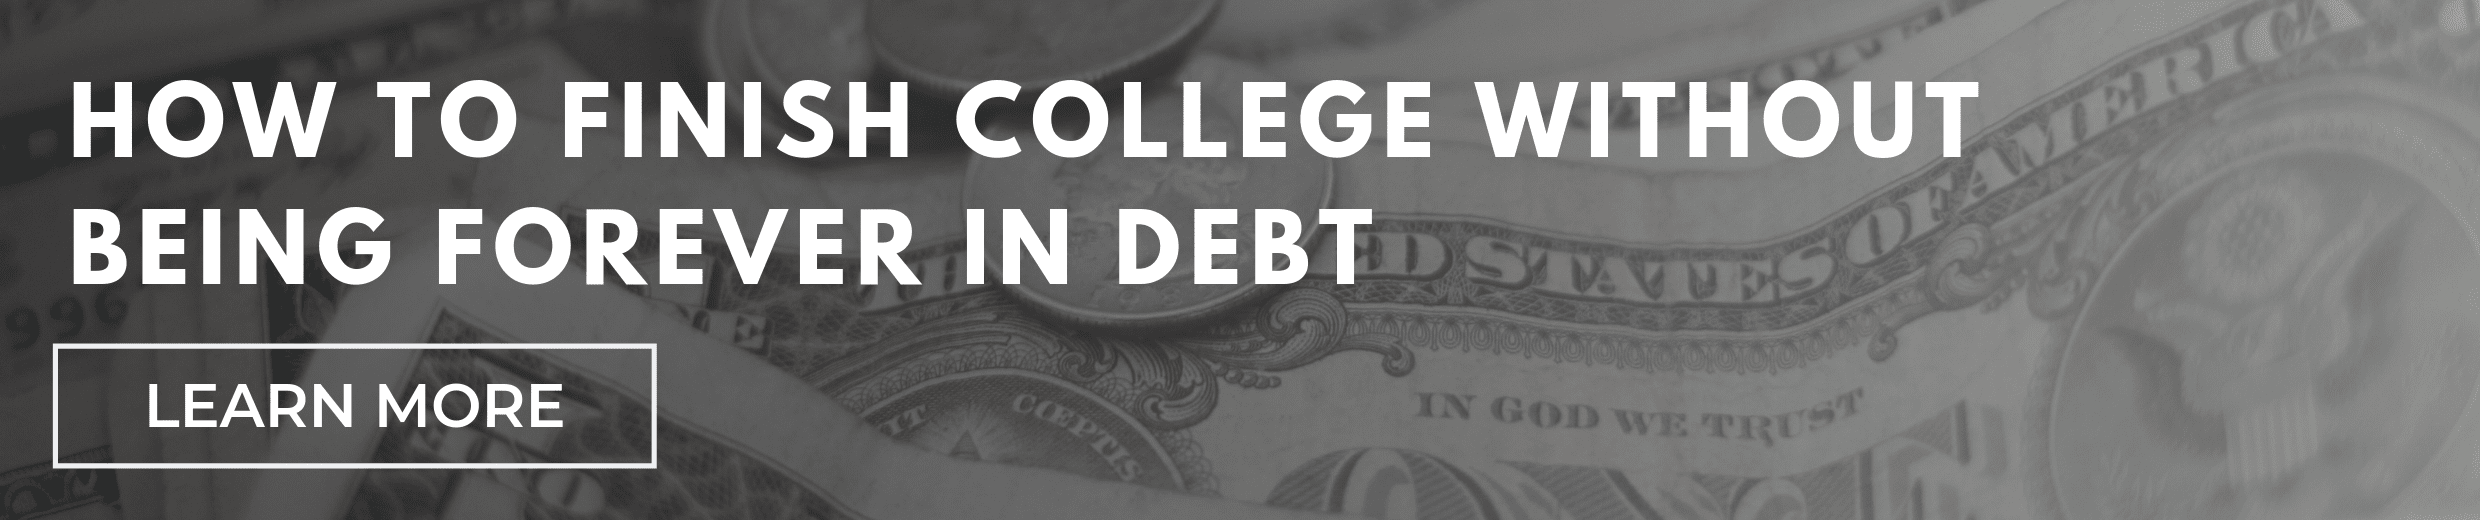 How to Finish College Without Being Forever in Debt